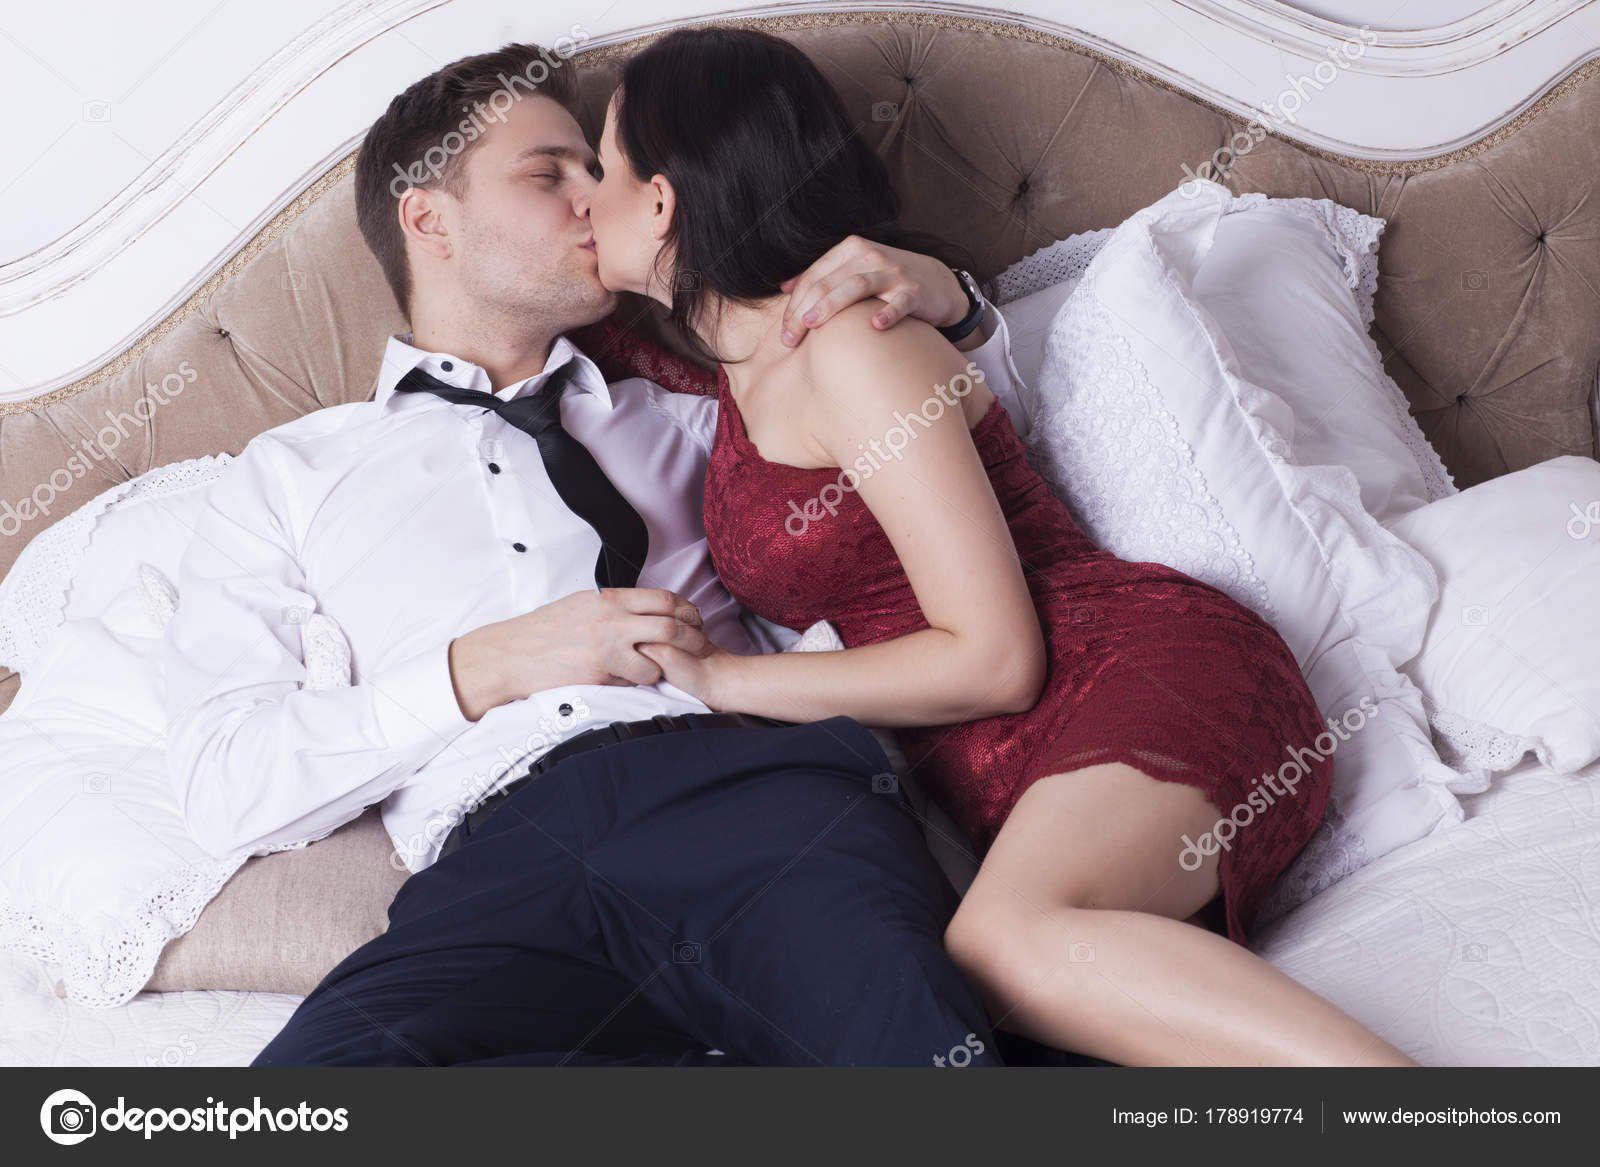 Sexy girl and boy pic in bedroom